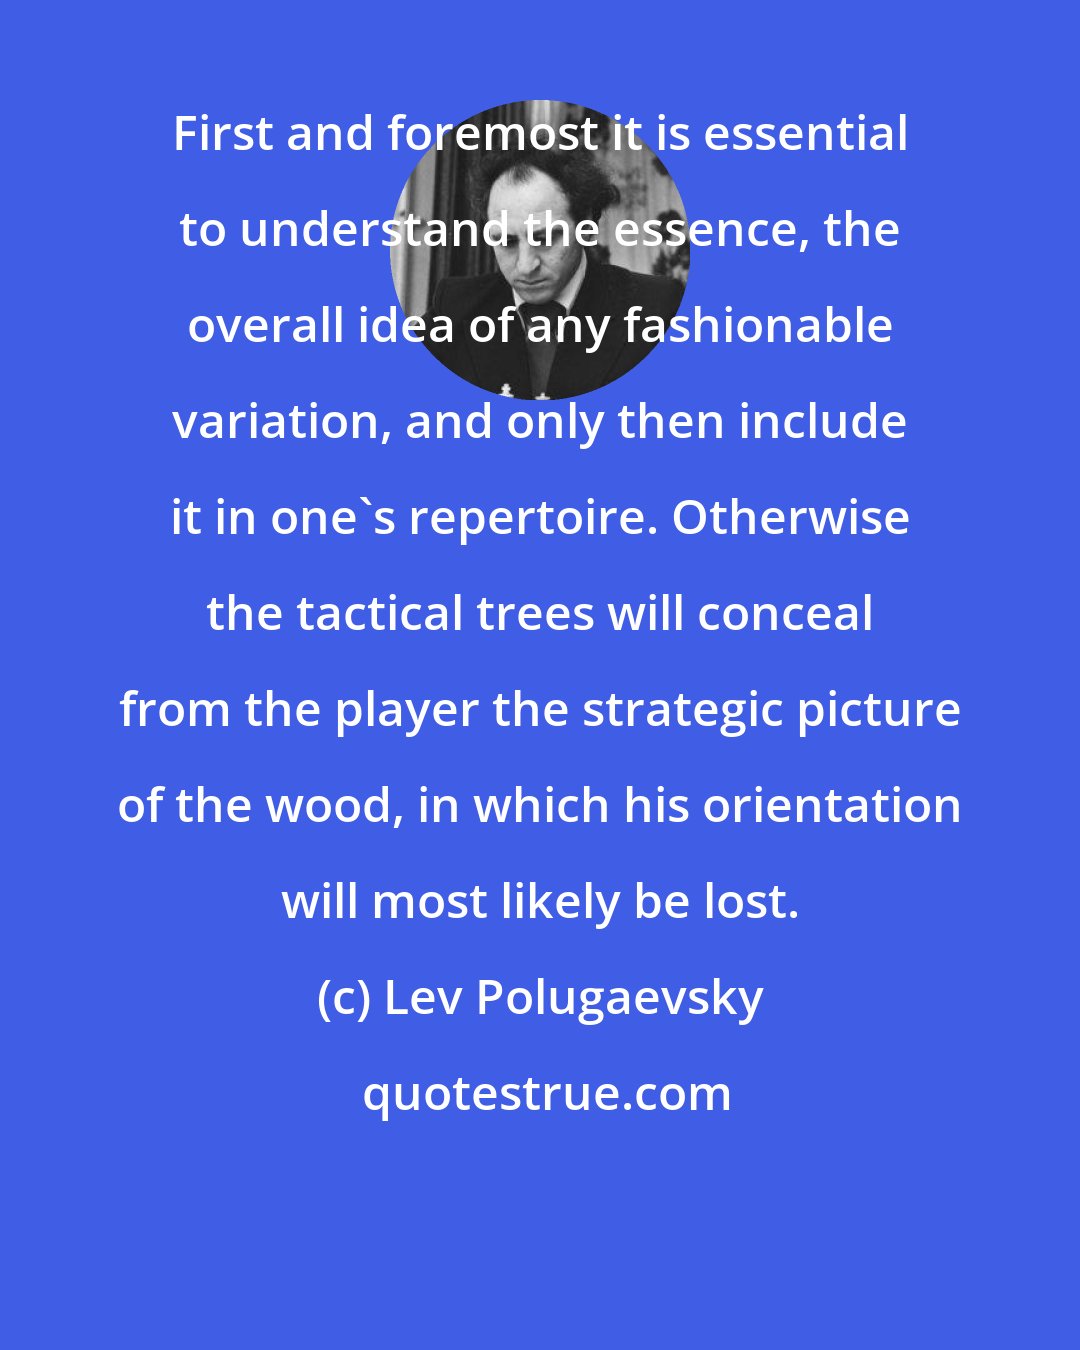 Lev Polugaevsky: First and foremost it is essential to understand the essence, the overall idea of any fashionable variation, and only then include it in one's repertoire. Otherwise the tactical trees will conceal from the player the strategic picture of the wood, in which his orientation will most likely be lost.